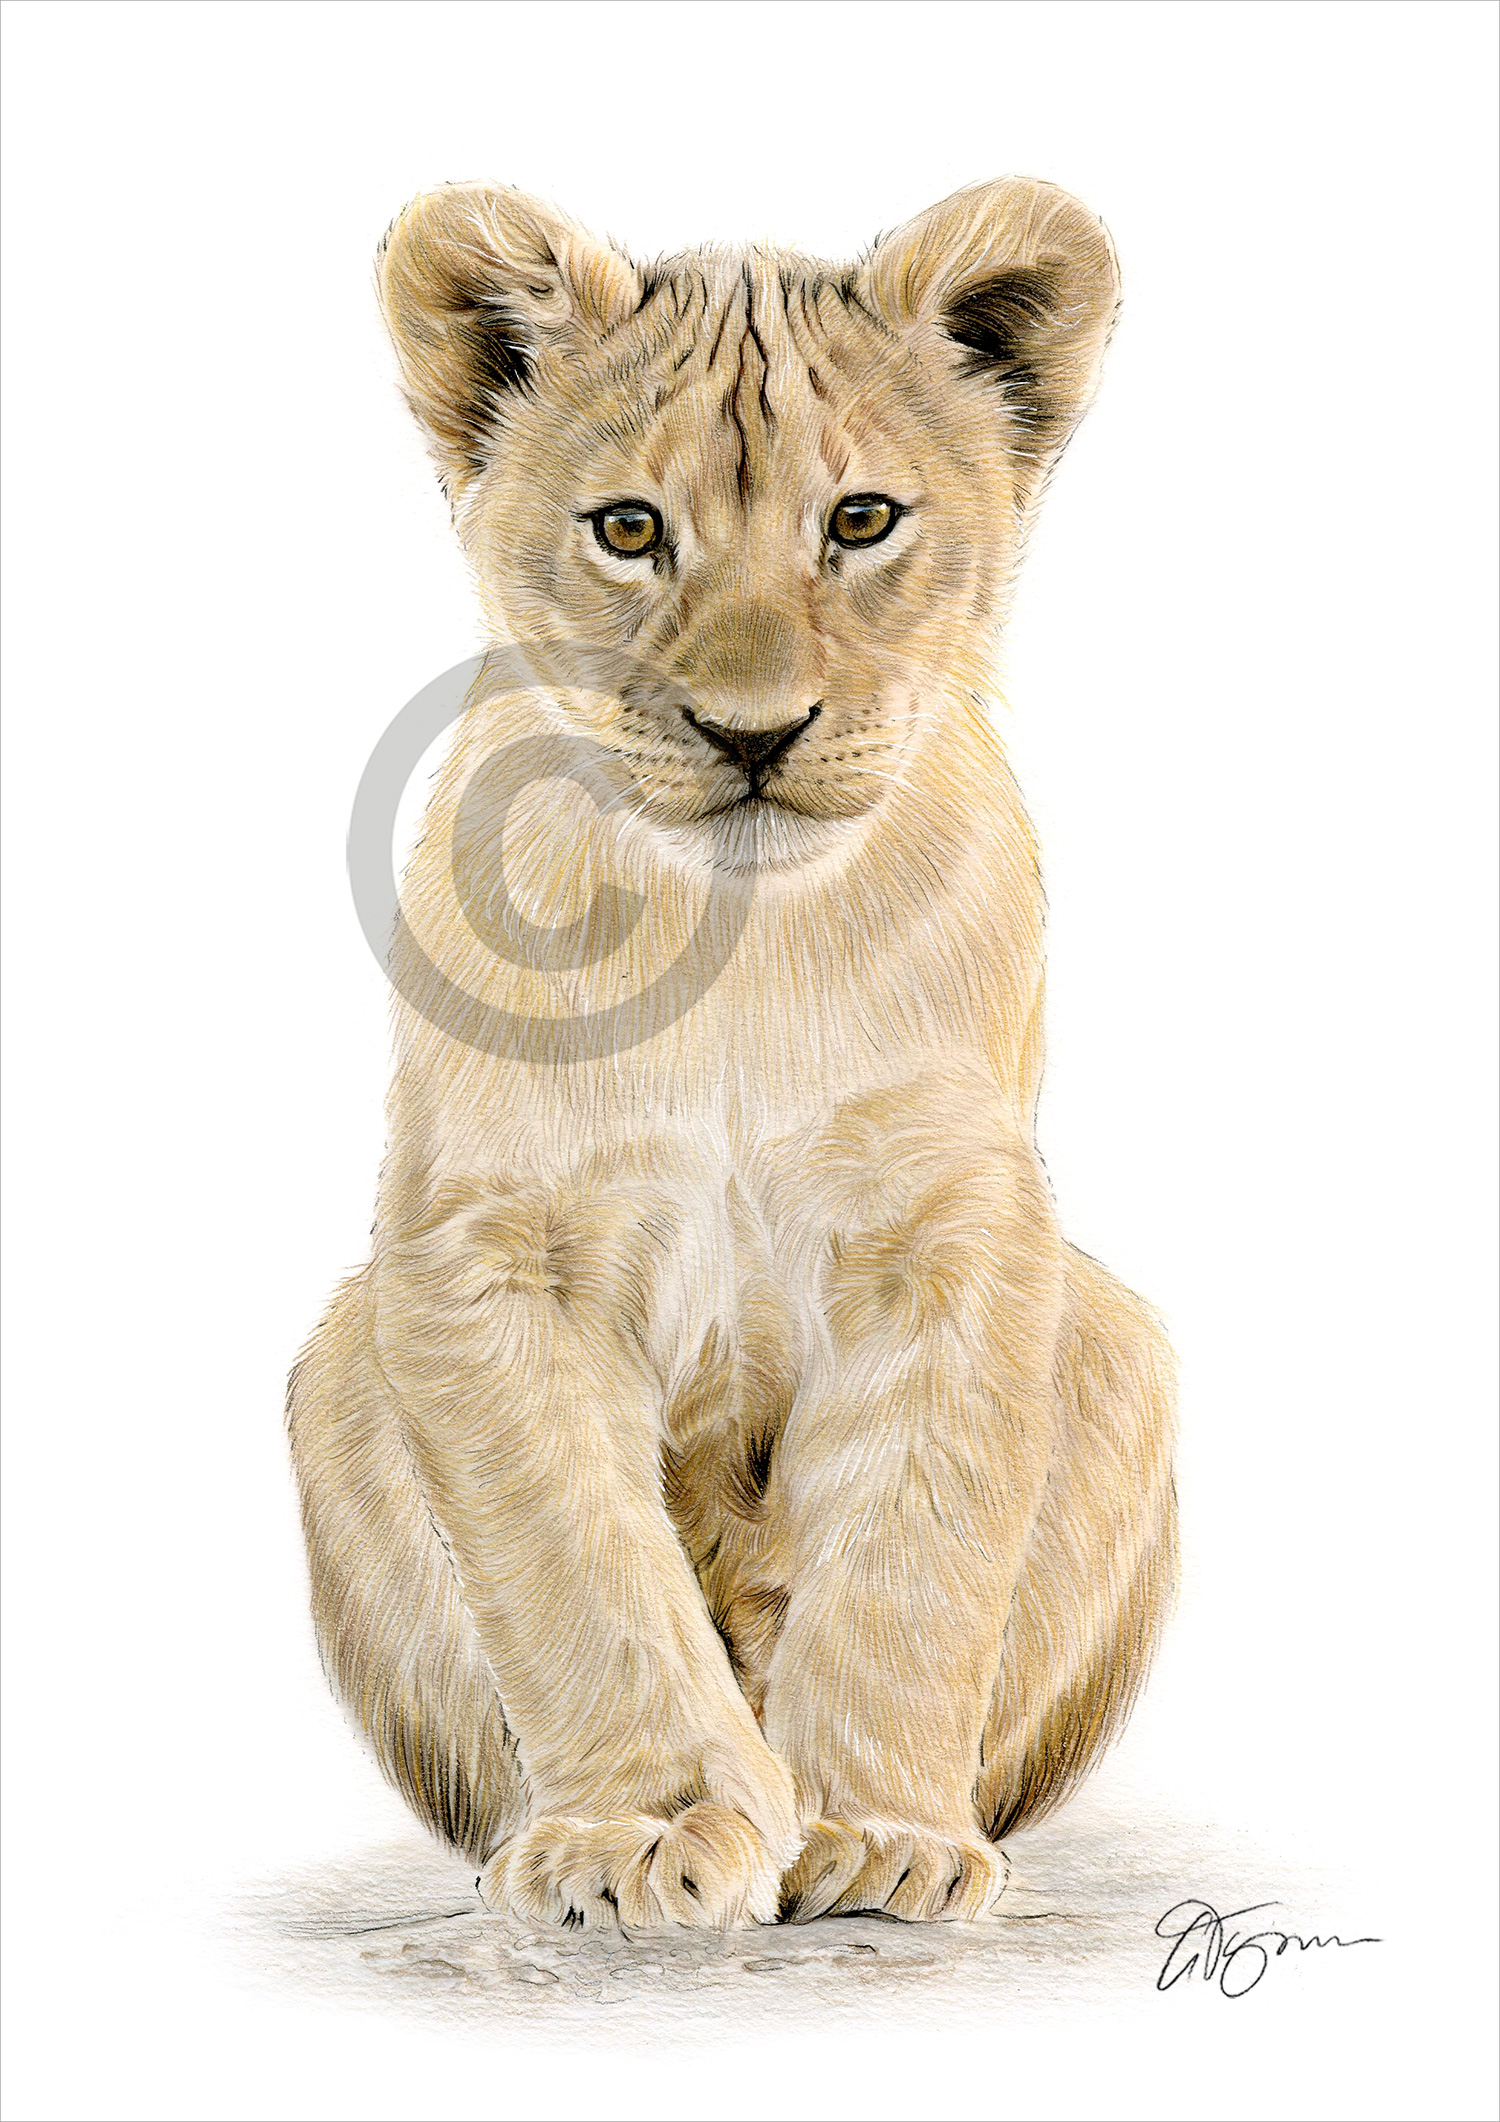 Colour pencil drawing of a Lion Cub by artist Gary Tymon